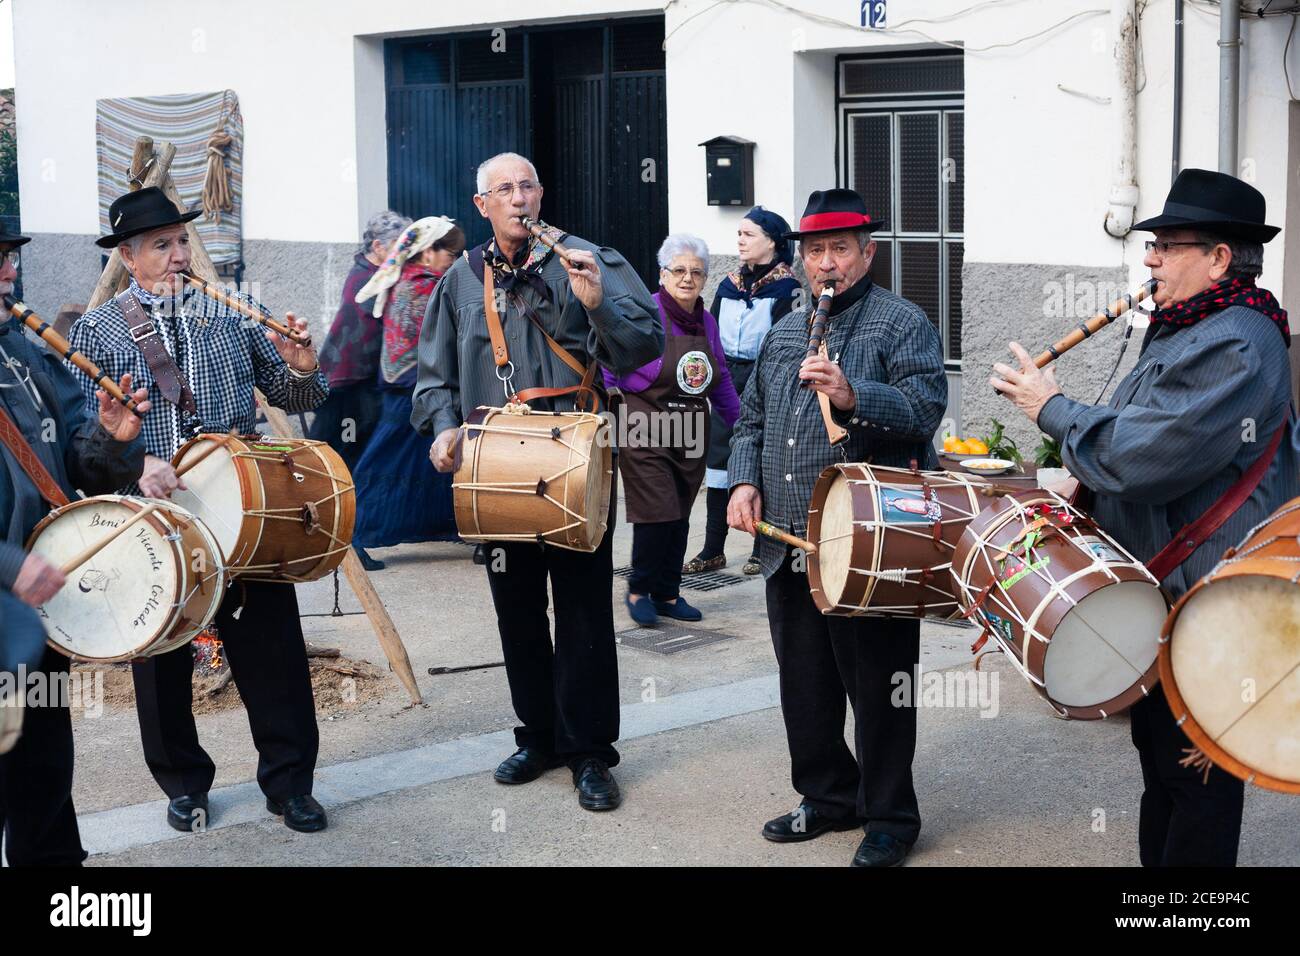 VALDASTILLAS, SPAIN - Nov 23, 2019: Feast of representation of the slaughter of the pig with traditional music, market and roast of chops on the barbe Stock Photo